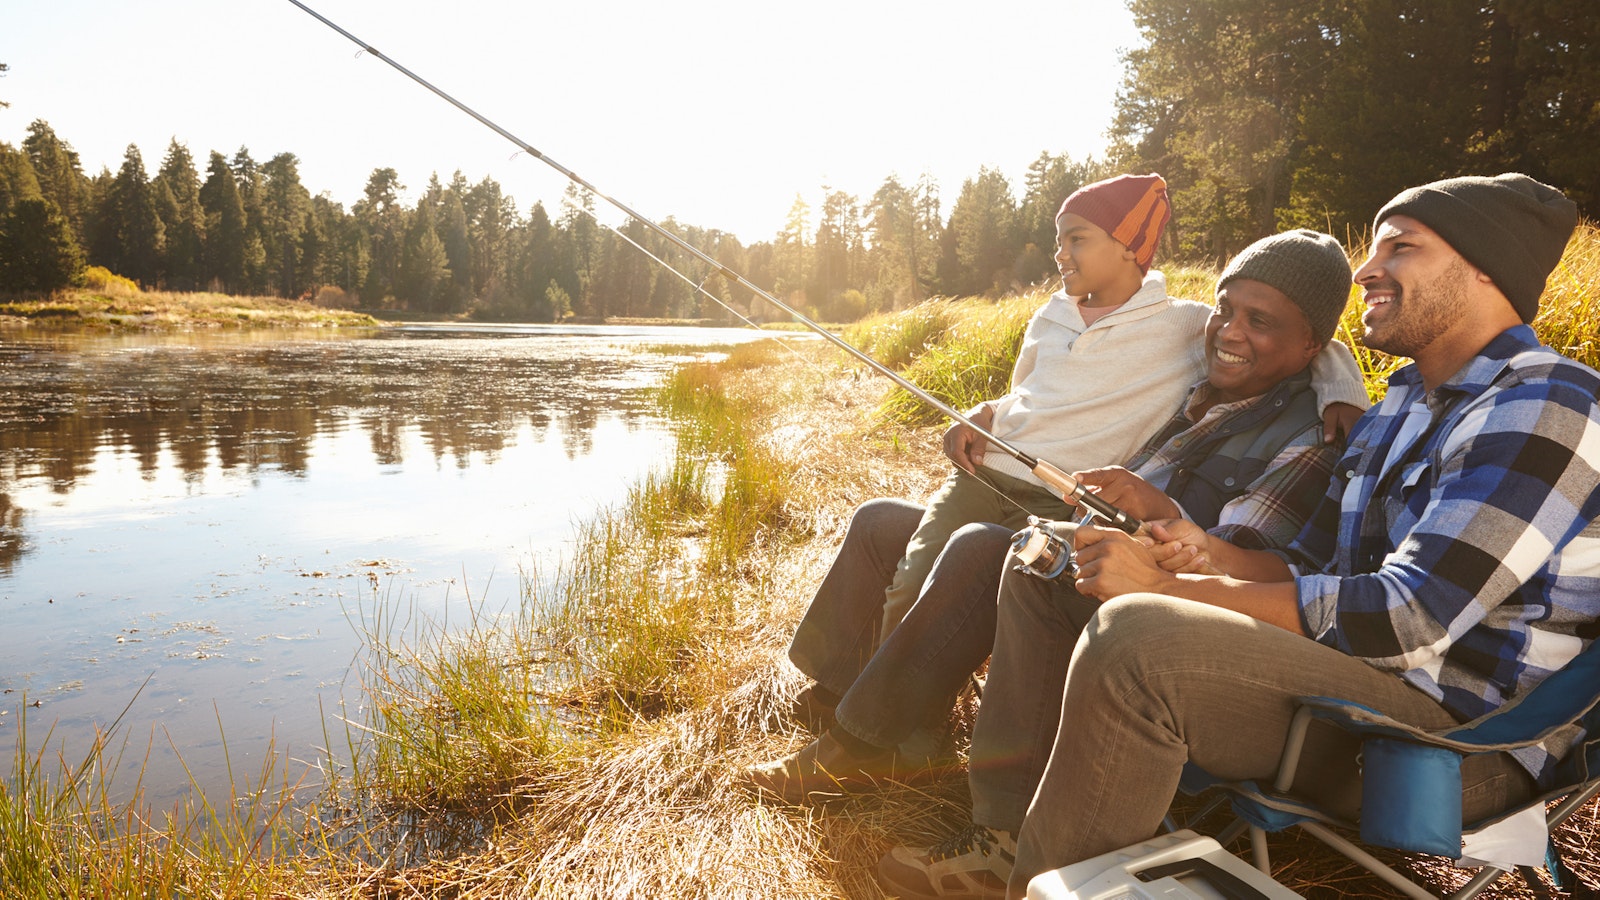 Three people sit on a riverbank and fish